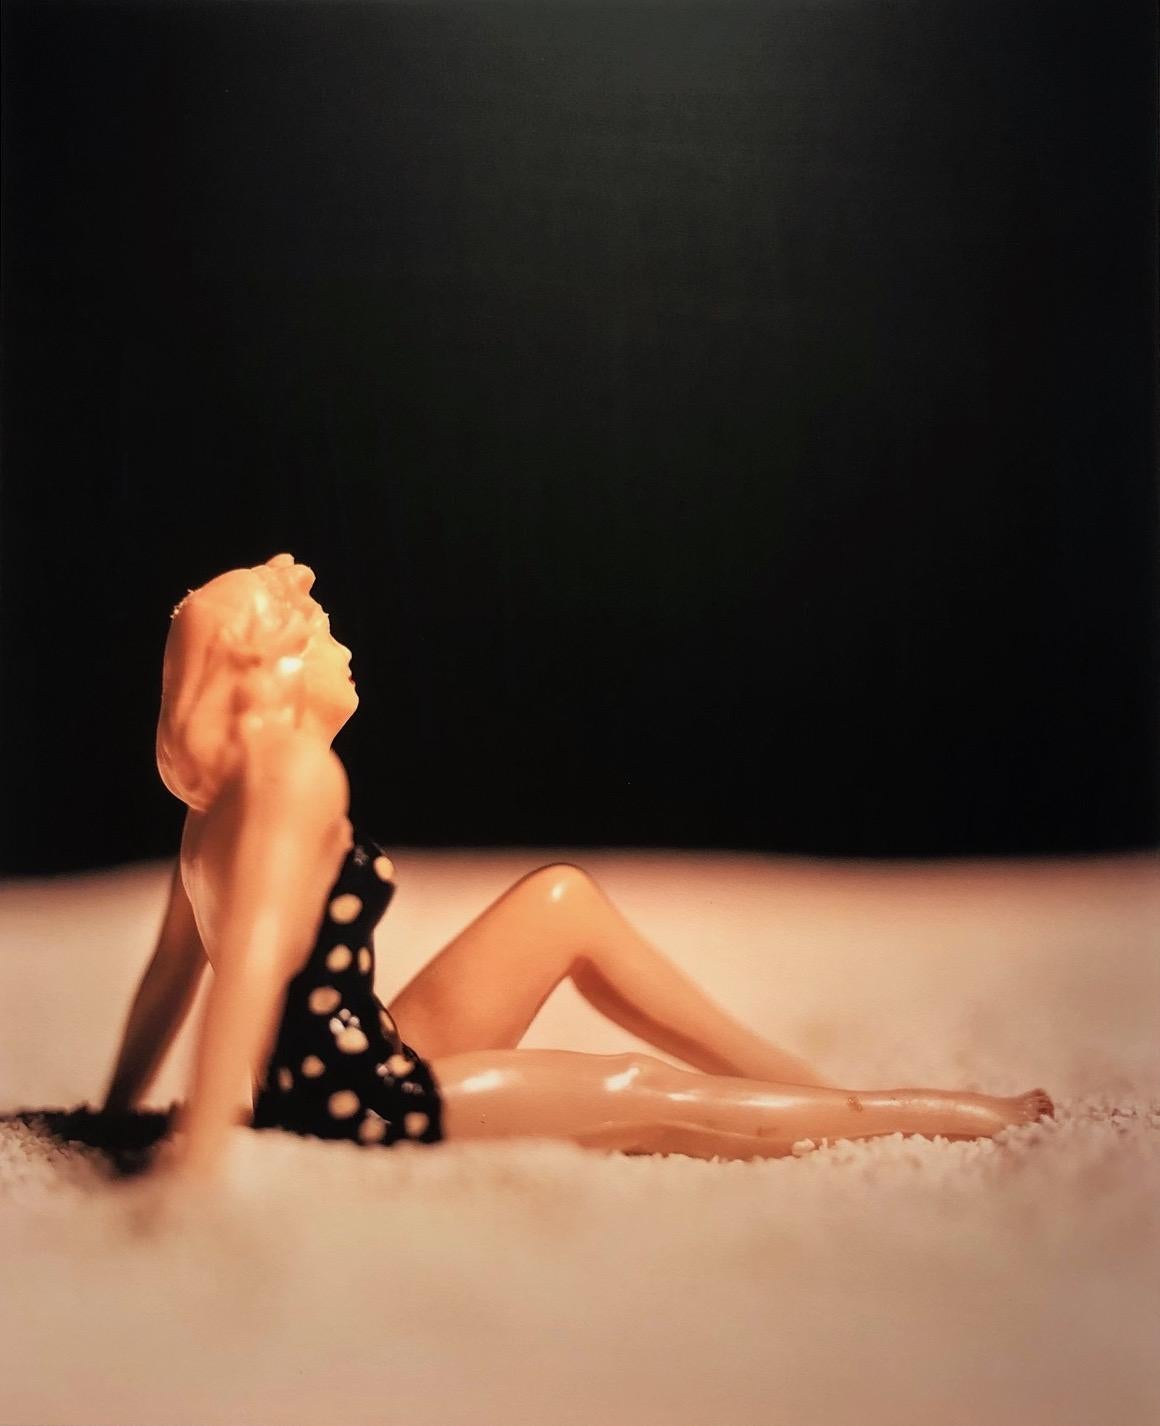 David Levinthal Figurative Photograph - Untitled from the series American Beauties (AB-16)